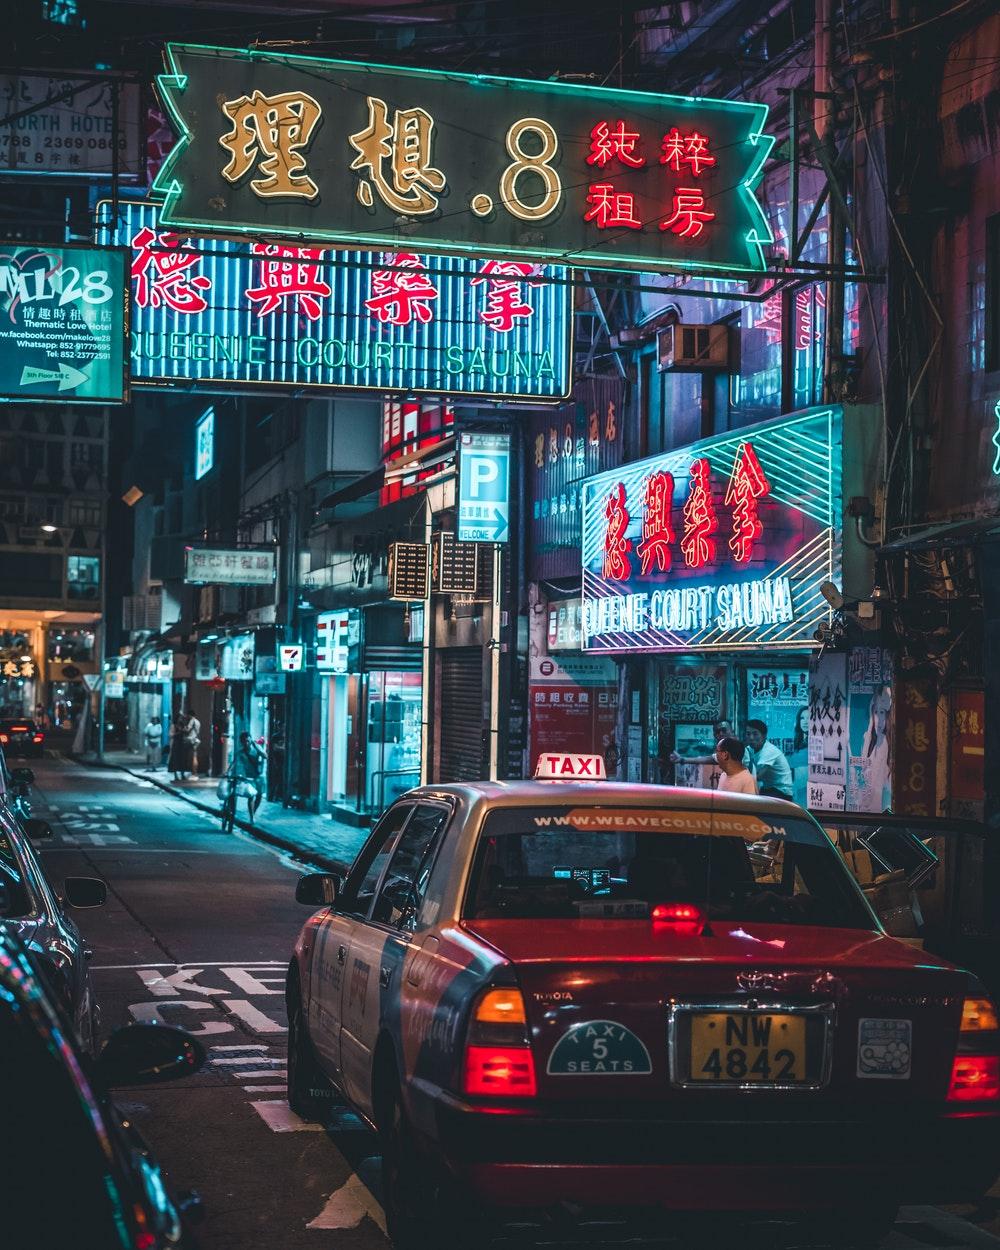 Taxi in a neon lit street. HD photo